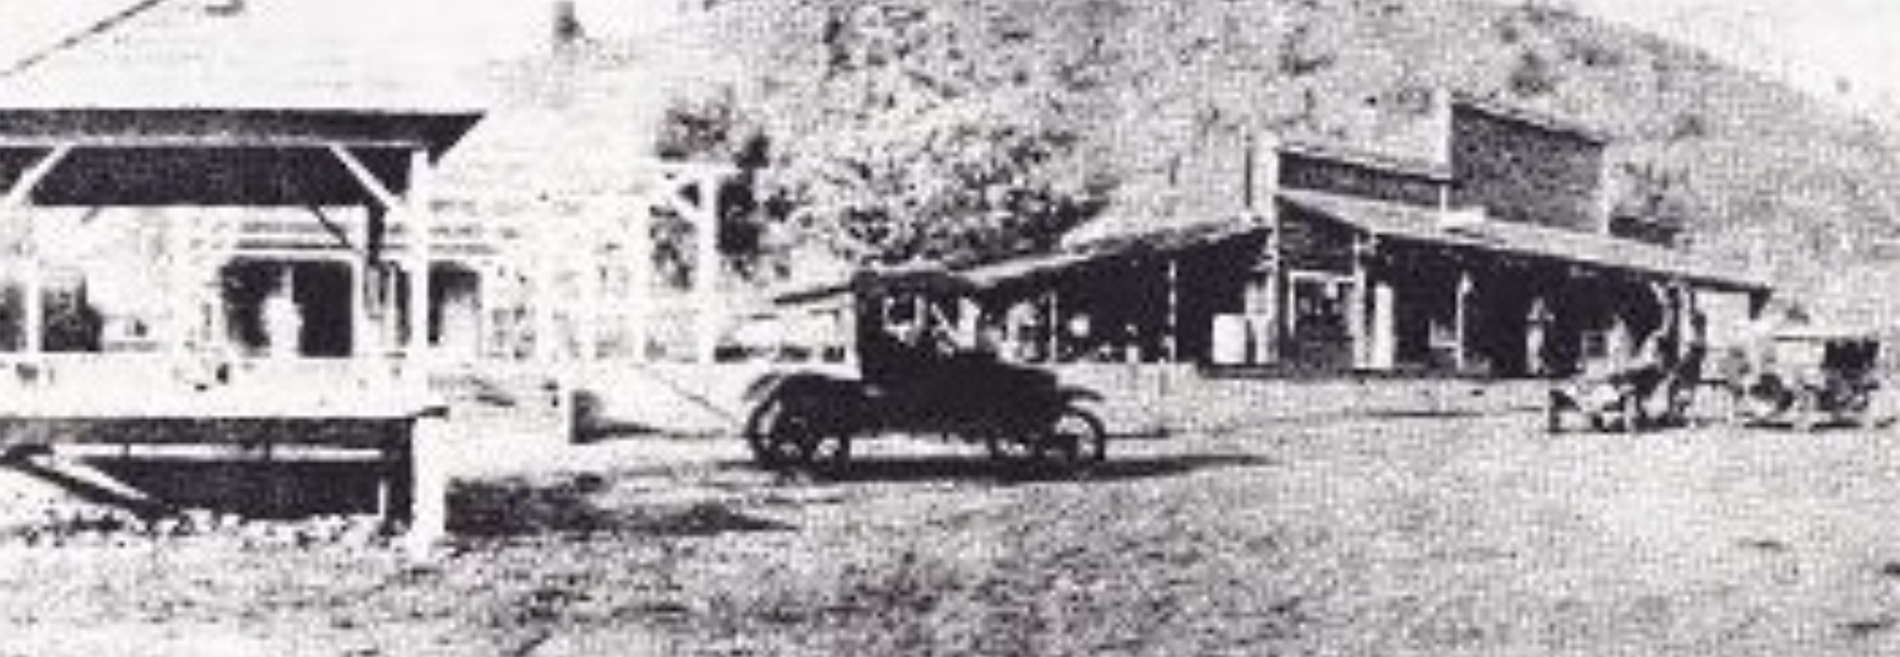 picture of Coarsegold in 1920